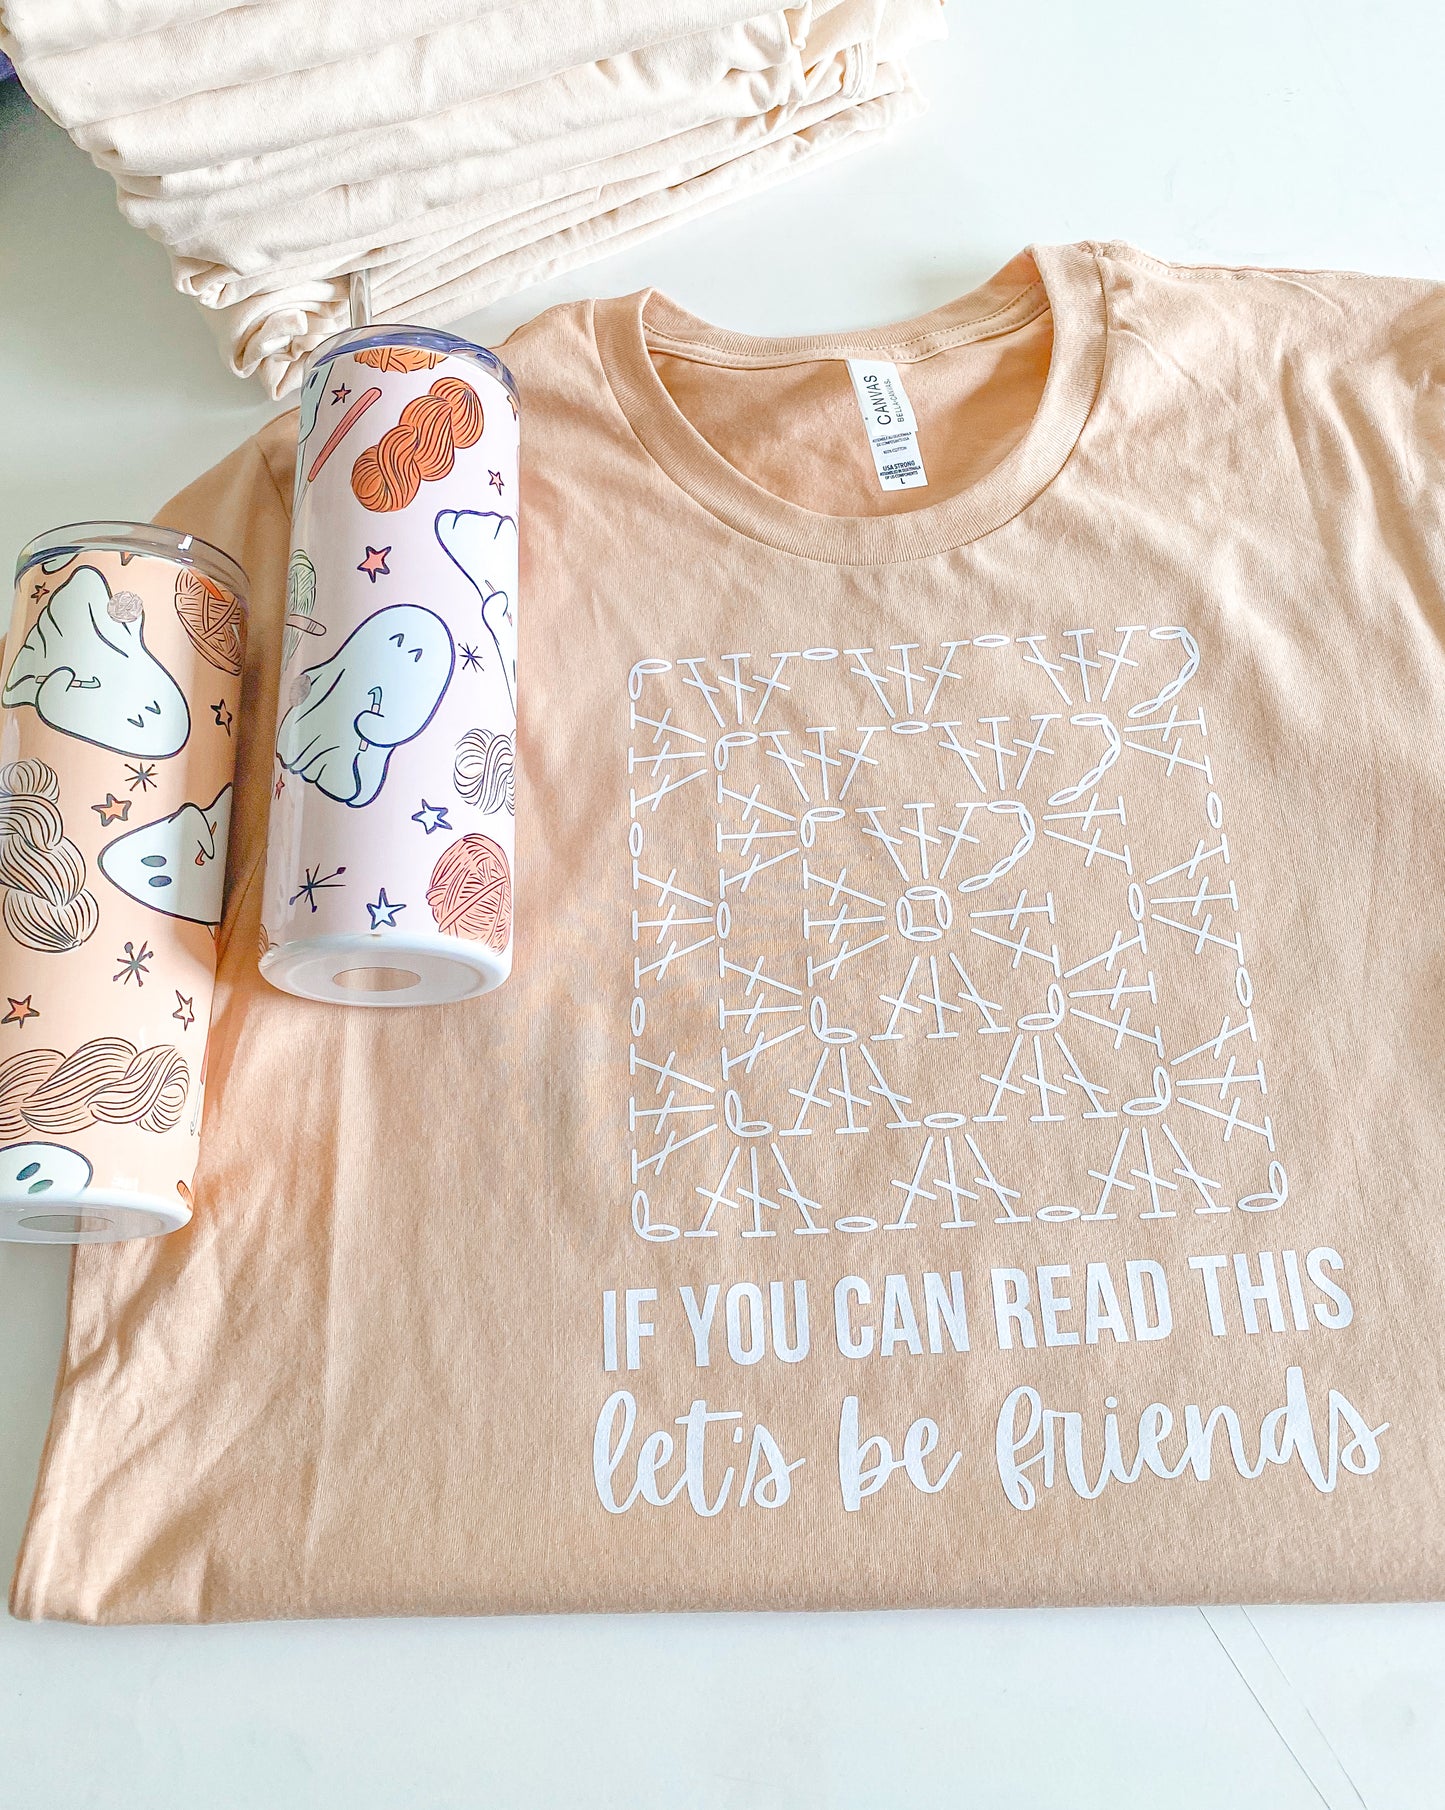 If you can read this, Lets be friends crochet T-shirt pink peach